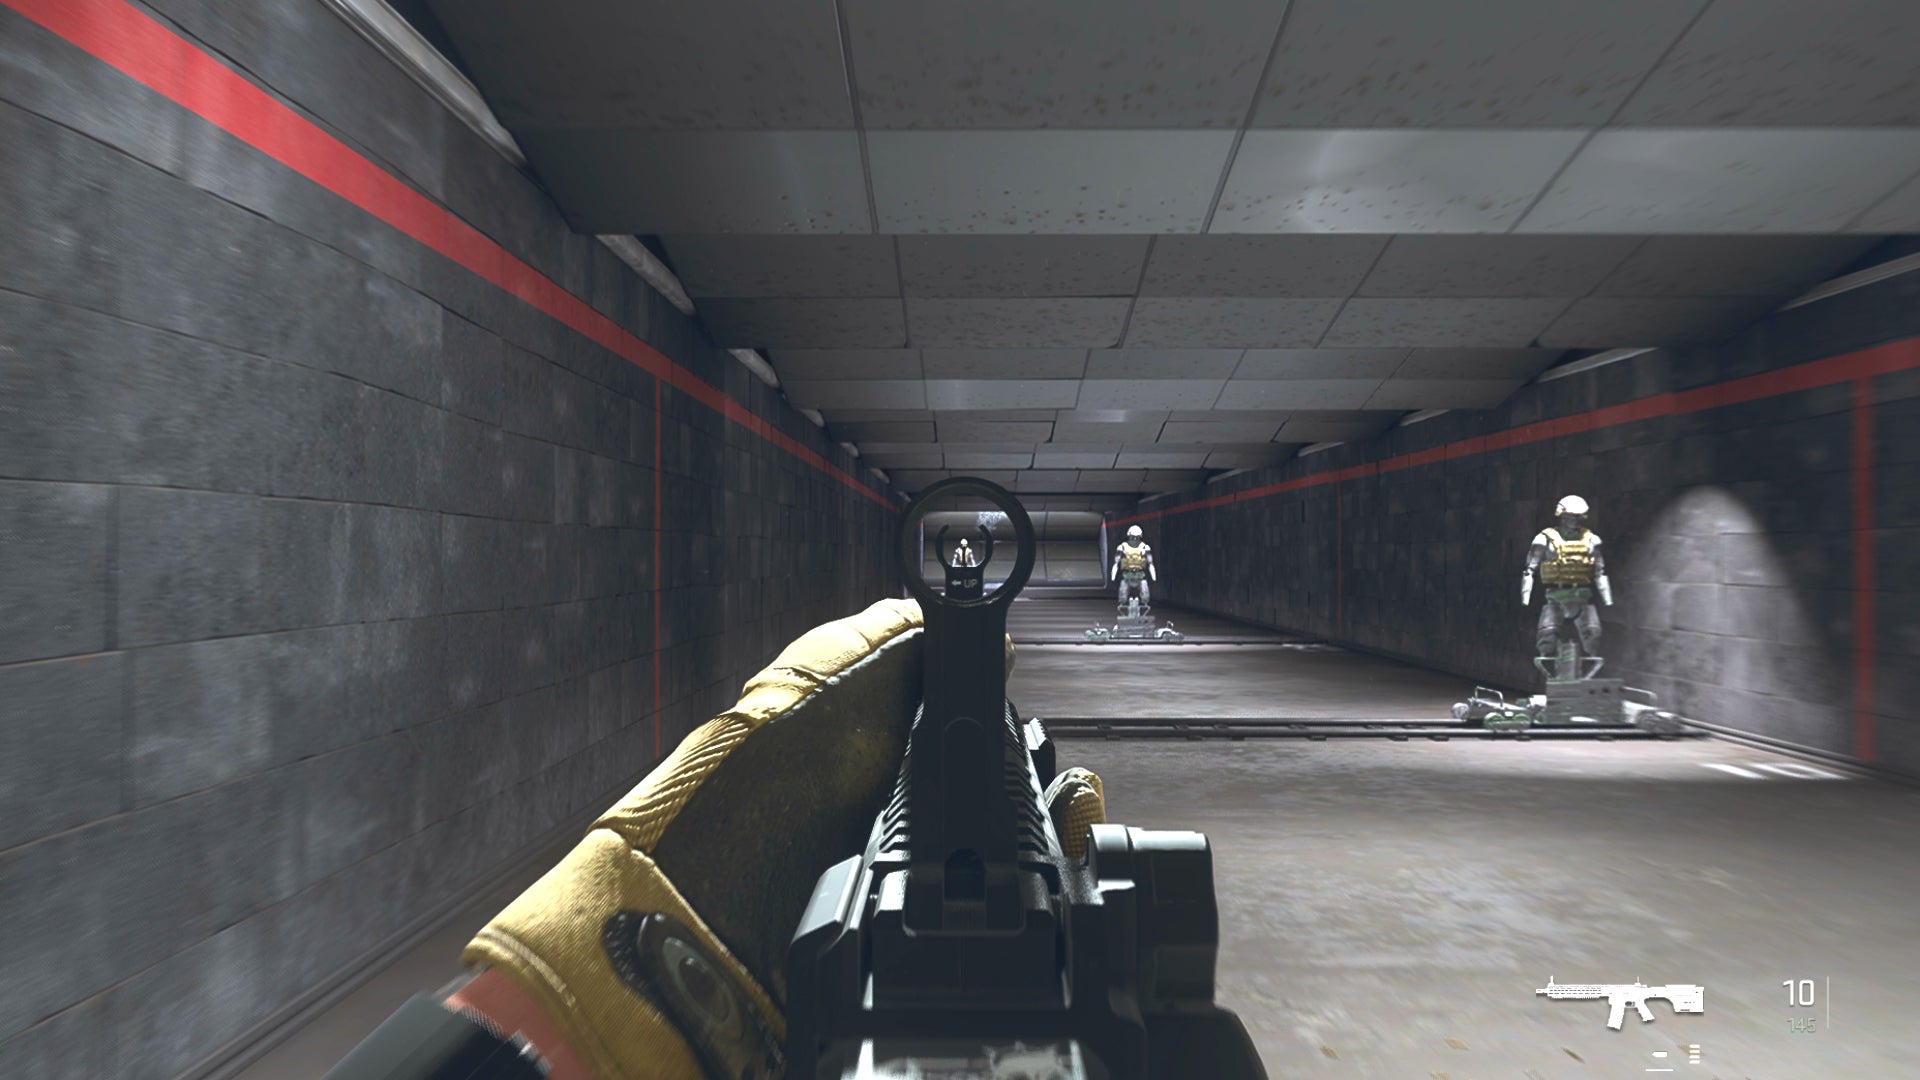 The player in Warzone 2.0 aims at a training dummy with the FTAC Recon ironsights.